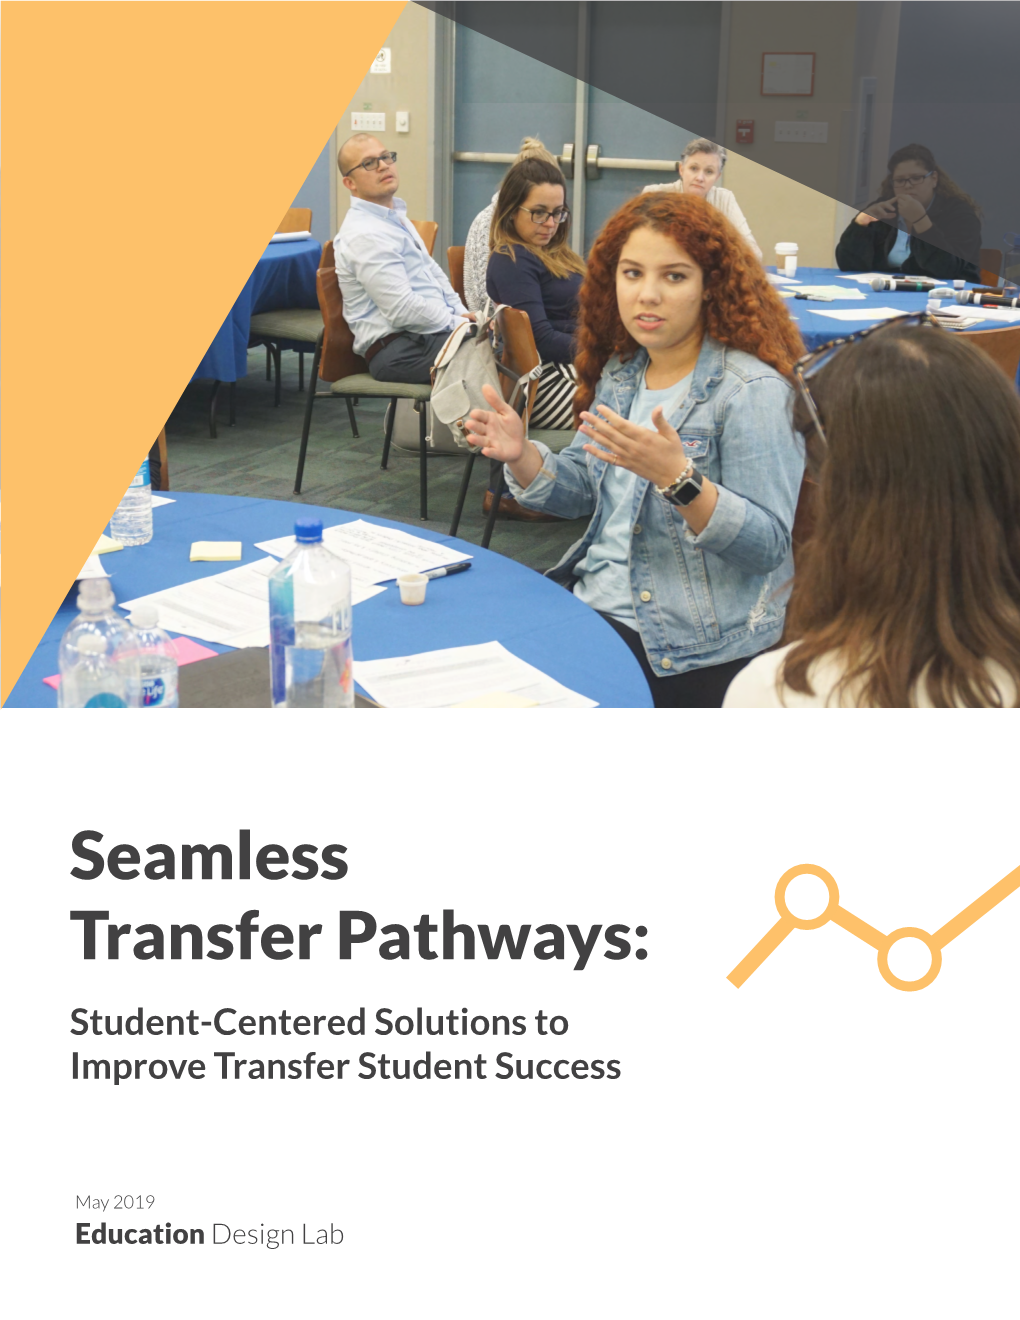 Seamless Transfer Pathways: Student-Centered Solutions to Improve Transfer Student Success